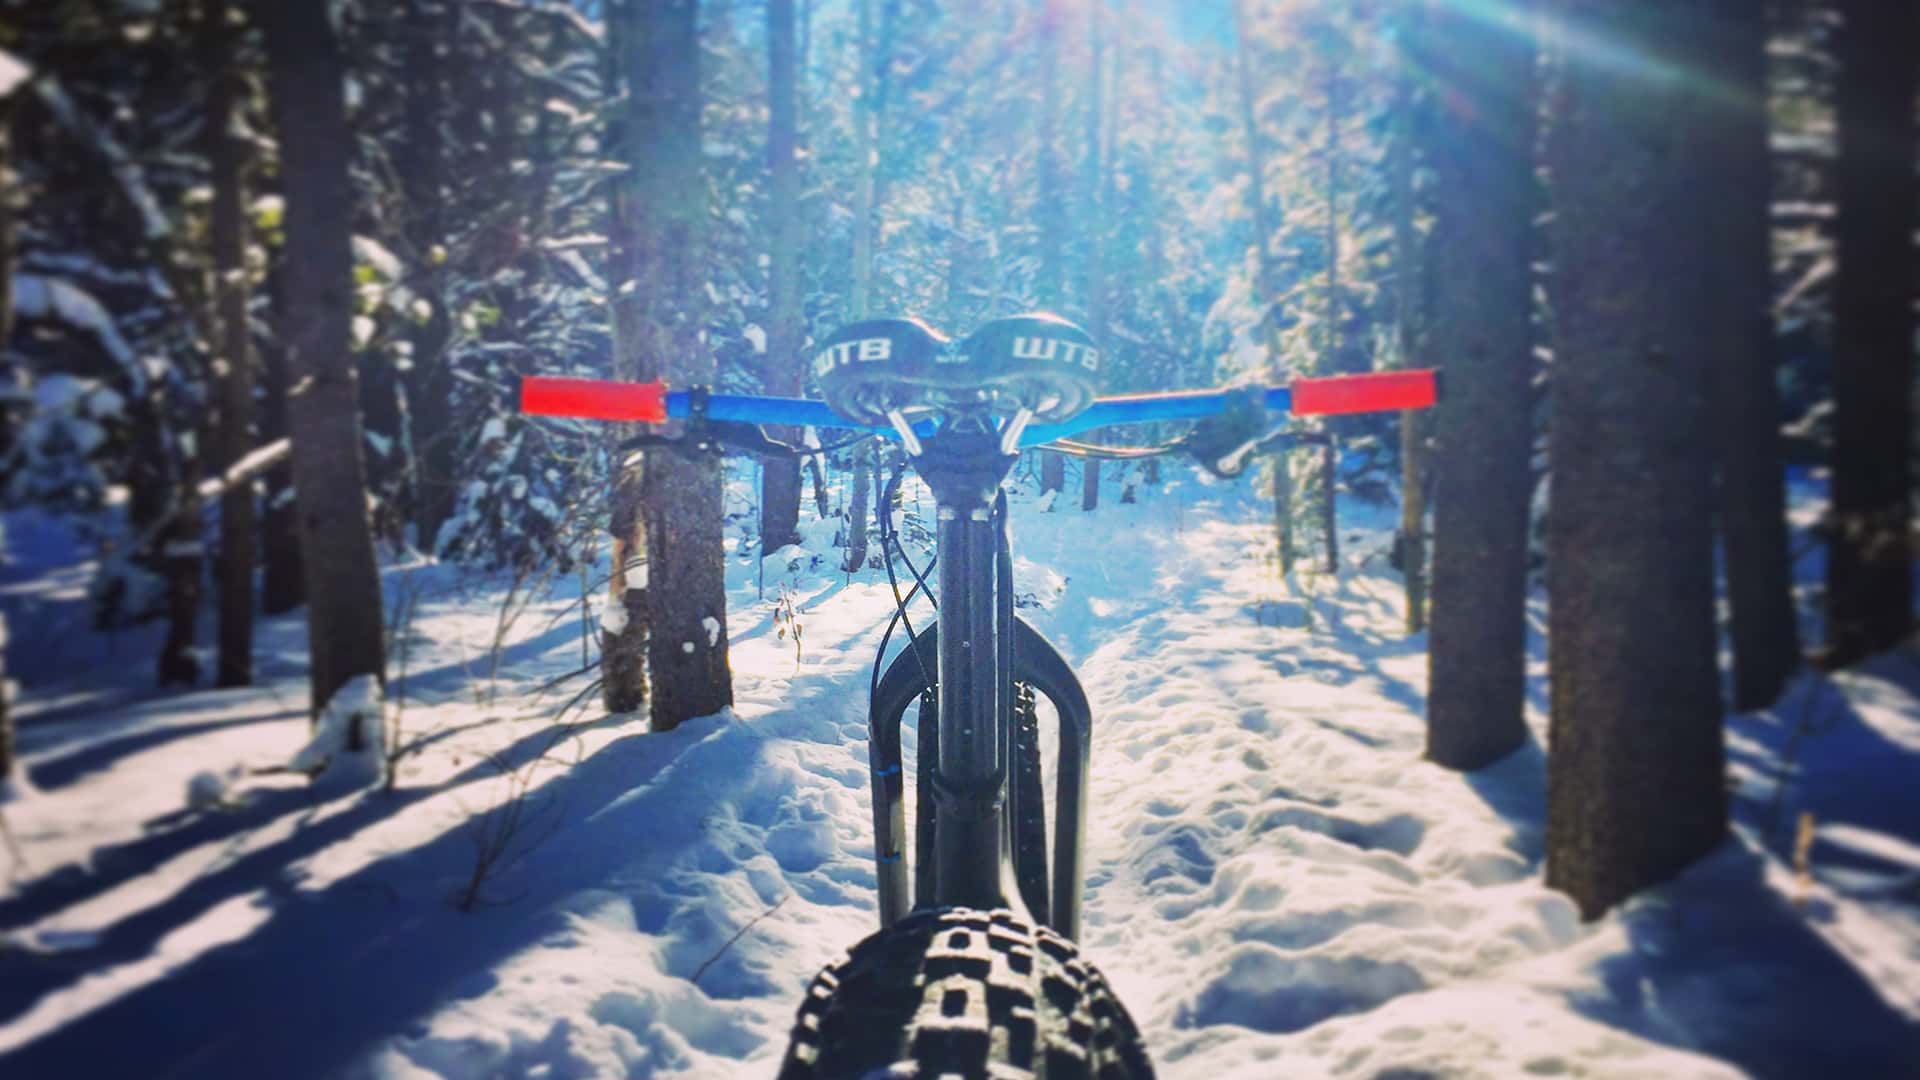 Guided Winter Fat Biking Tours, Experience the mountain snow in a unique way!